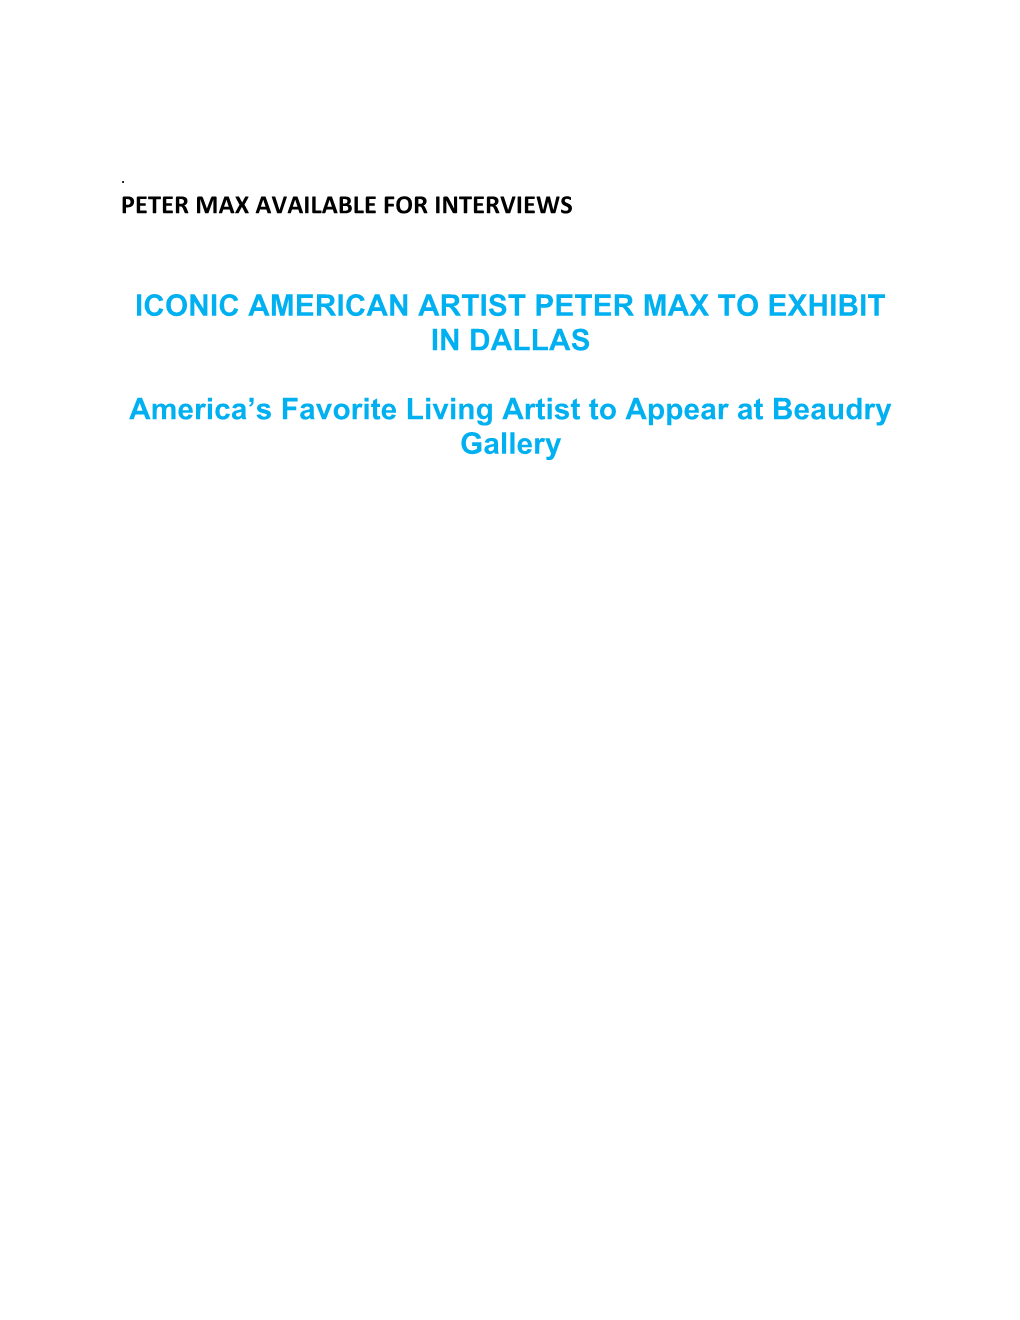 Iconic American Artist Peter Max to Exhibit in Dallas